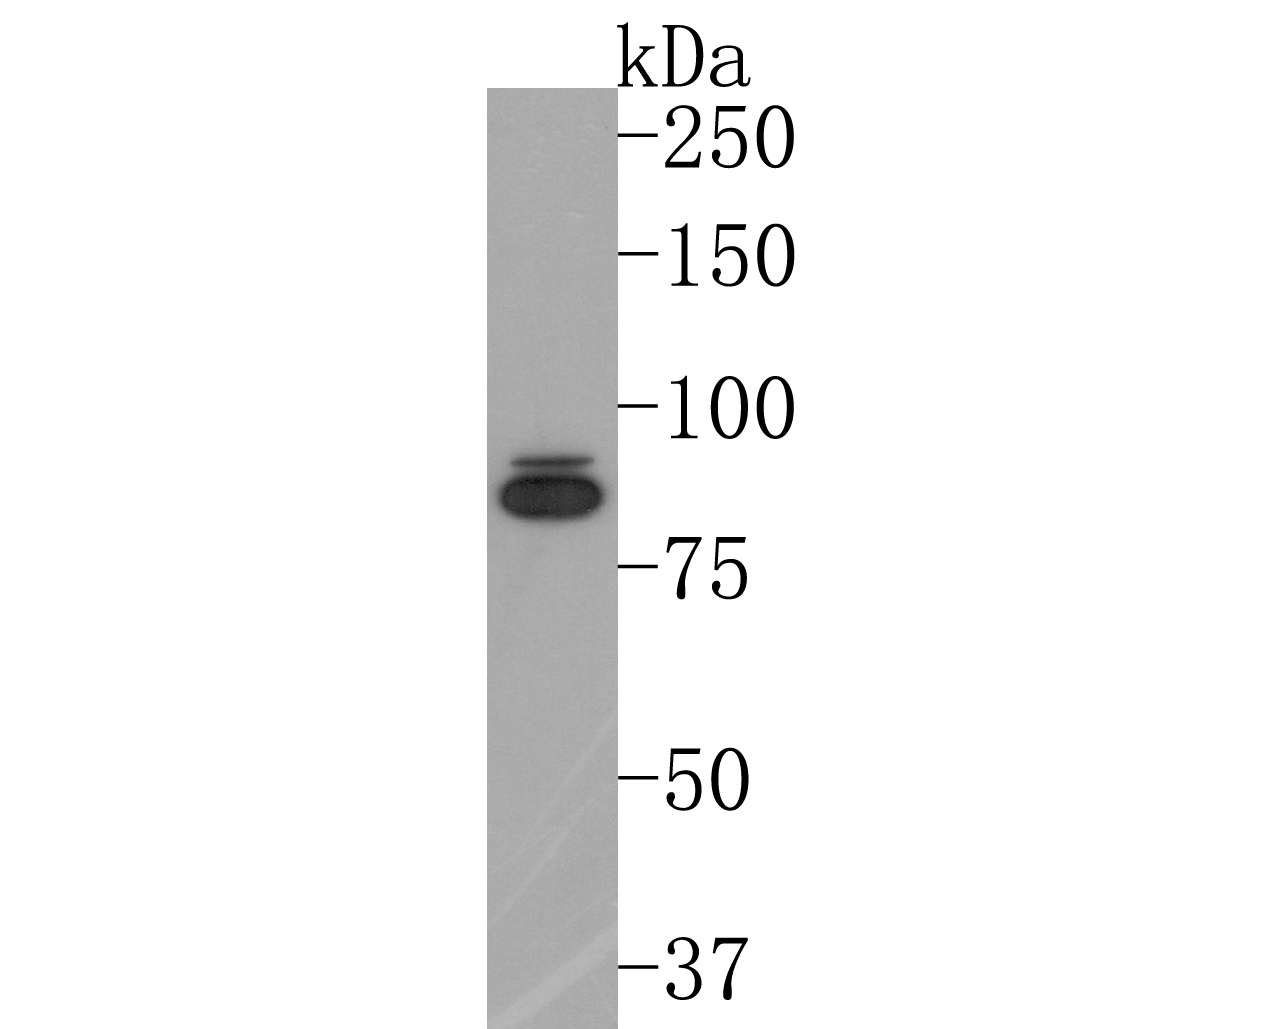 Western blot analysis of Cullin 1 on MCF-7 cell lysates. Proteins were transferred to a PVDF membrane and blocked with 5% BSA in PBS for 1 hour at room temperature. The primary antibody (ET1705-82, 1/500) was used in 5% BSA at room temperature for 2 hours. Goat Anti-Rabbit IgG - HRP Secondary Antibody (HA1001) at 1:200,000 dilution was used for 1 hour at room temperature.